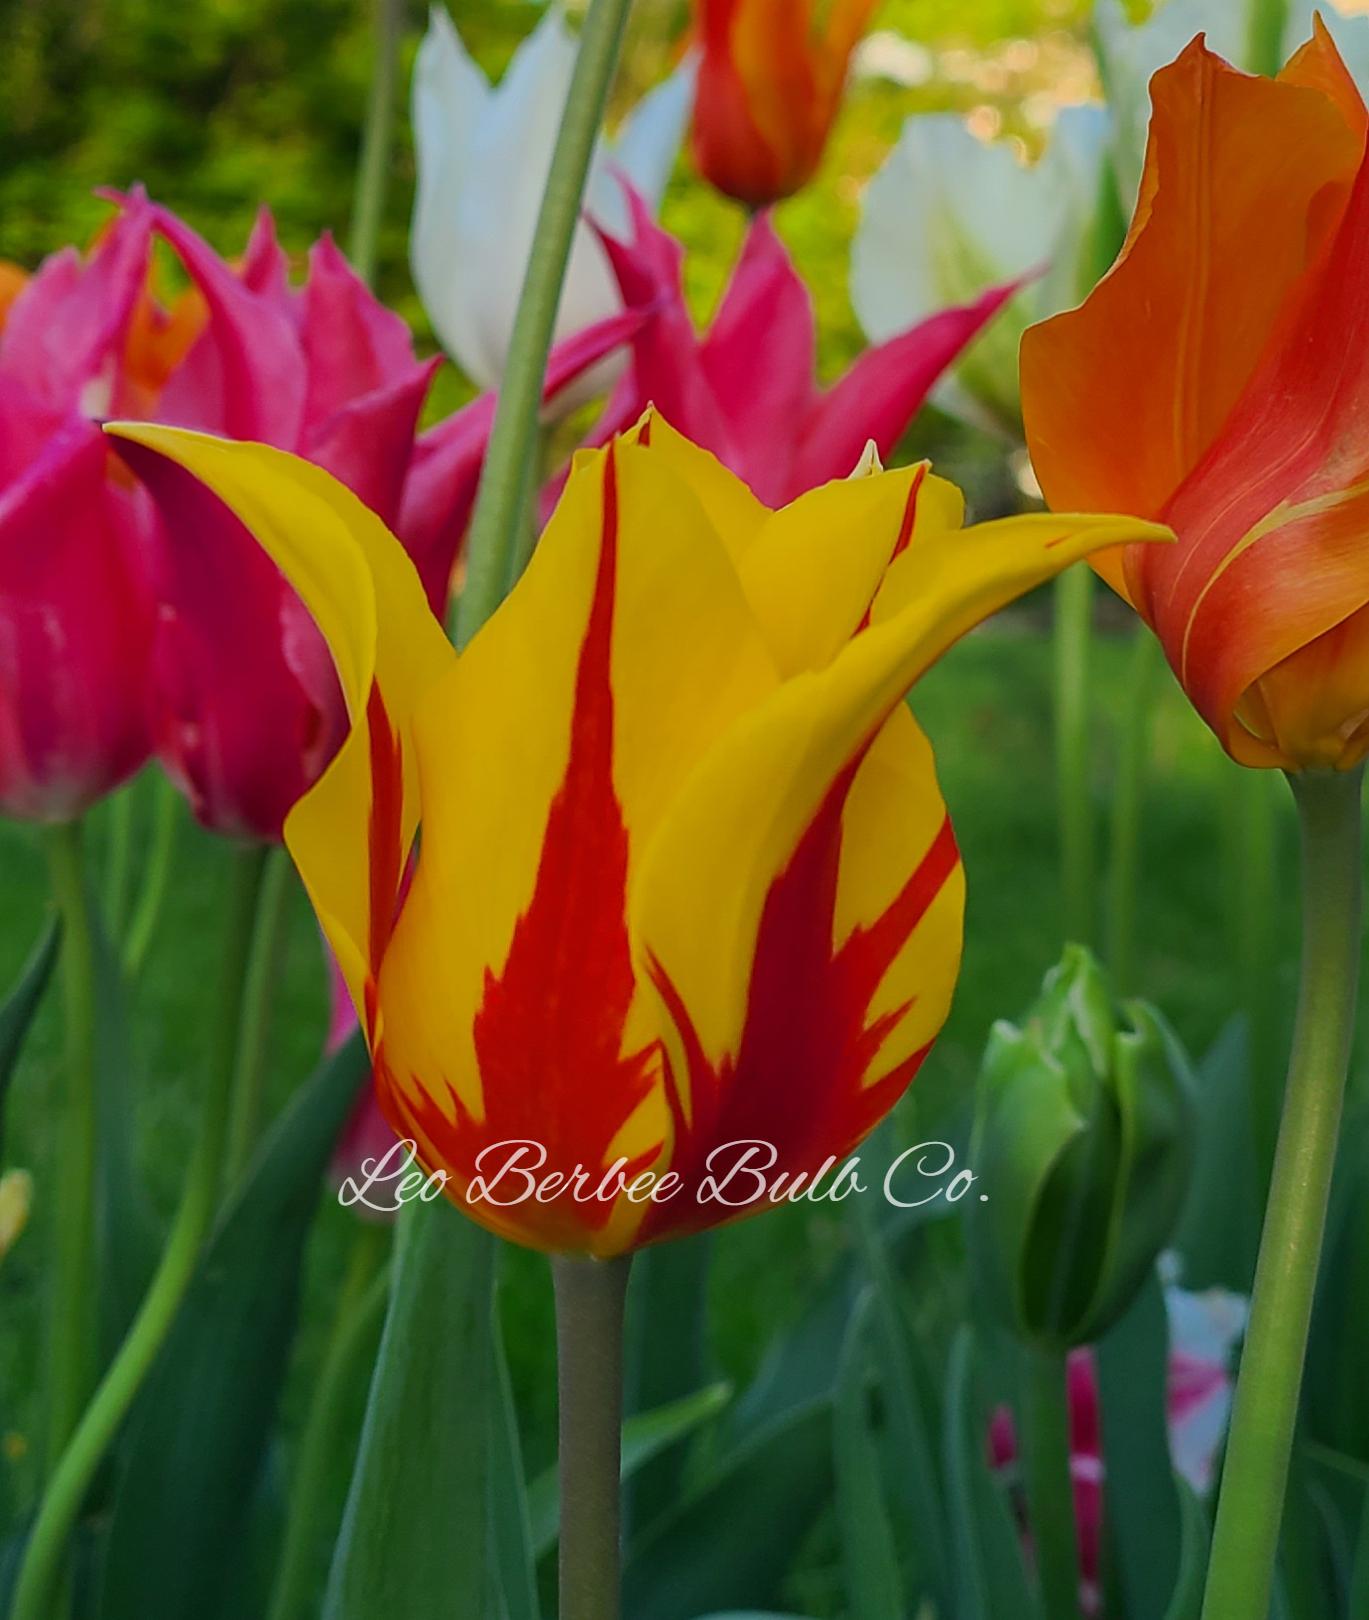 Tulip Lily Flowering 'Fireworks' - Tulip from Leo Berbee Bulb Company